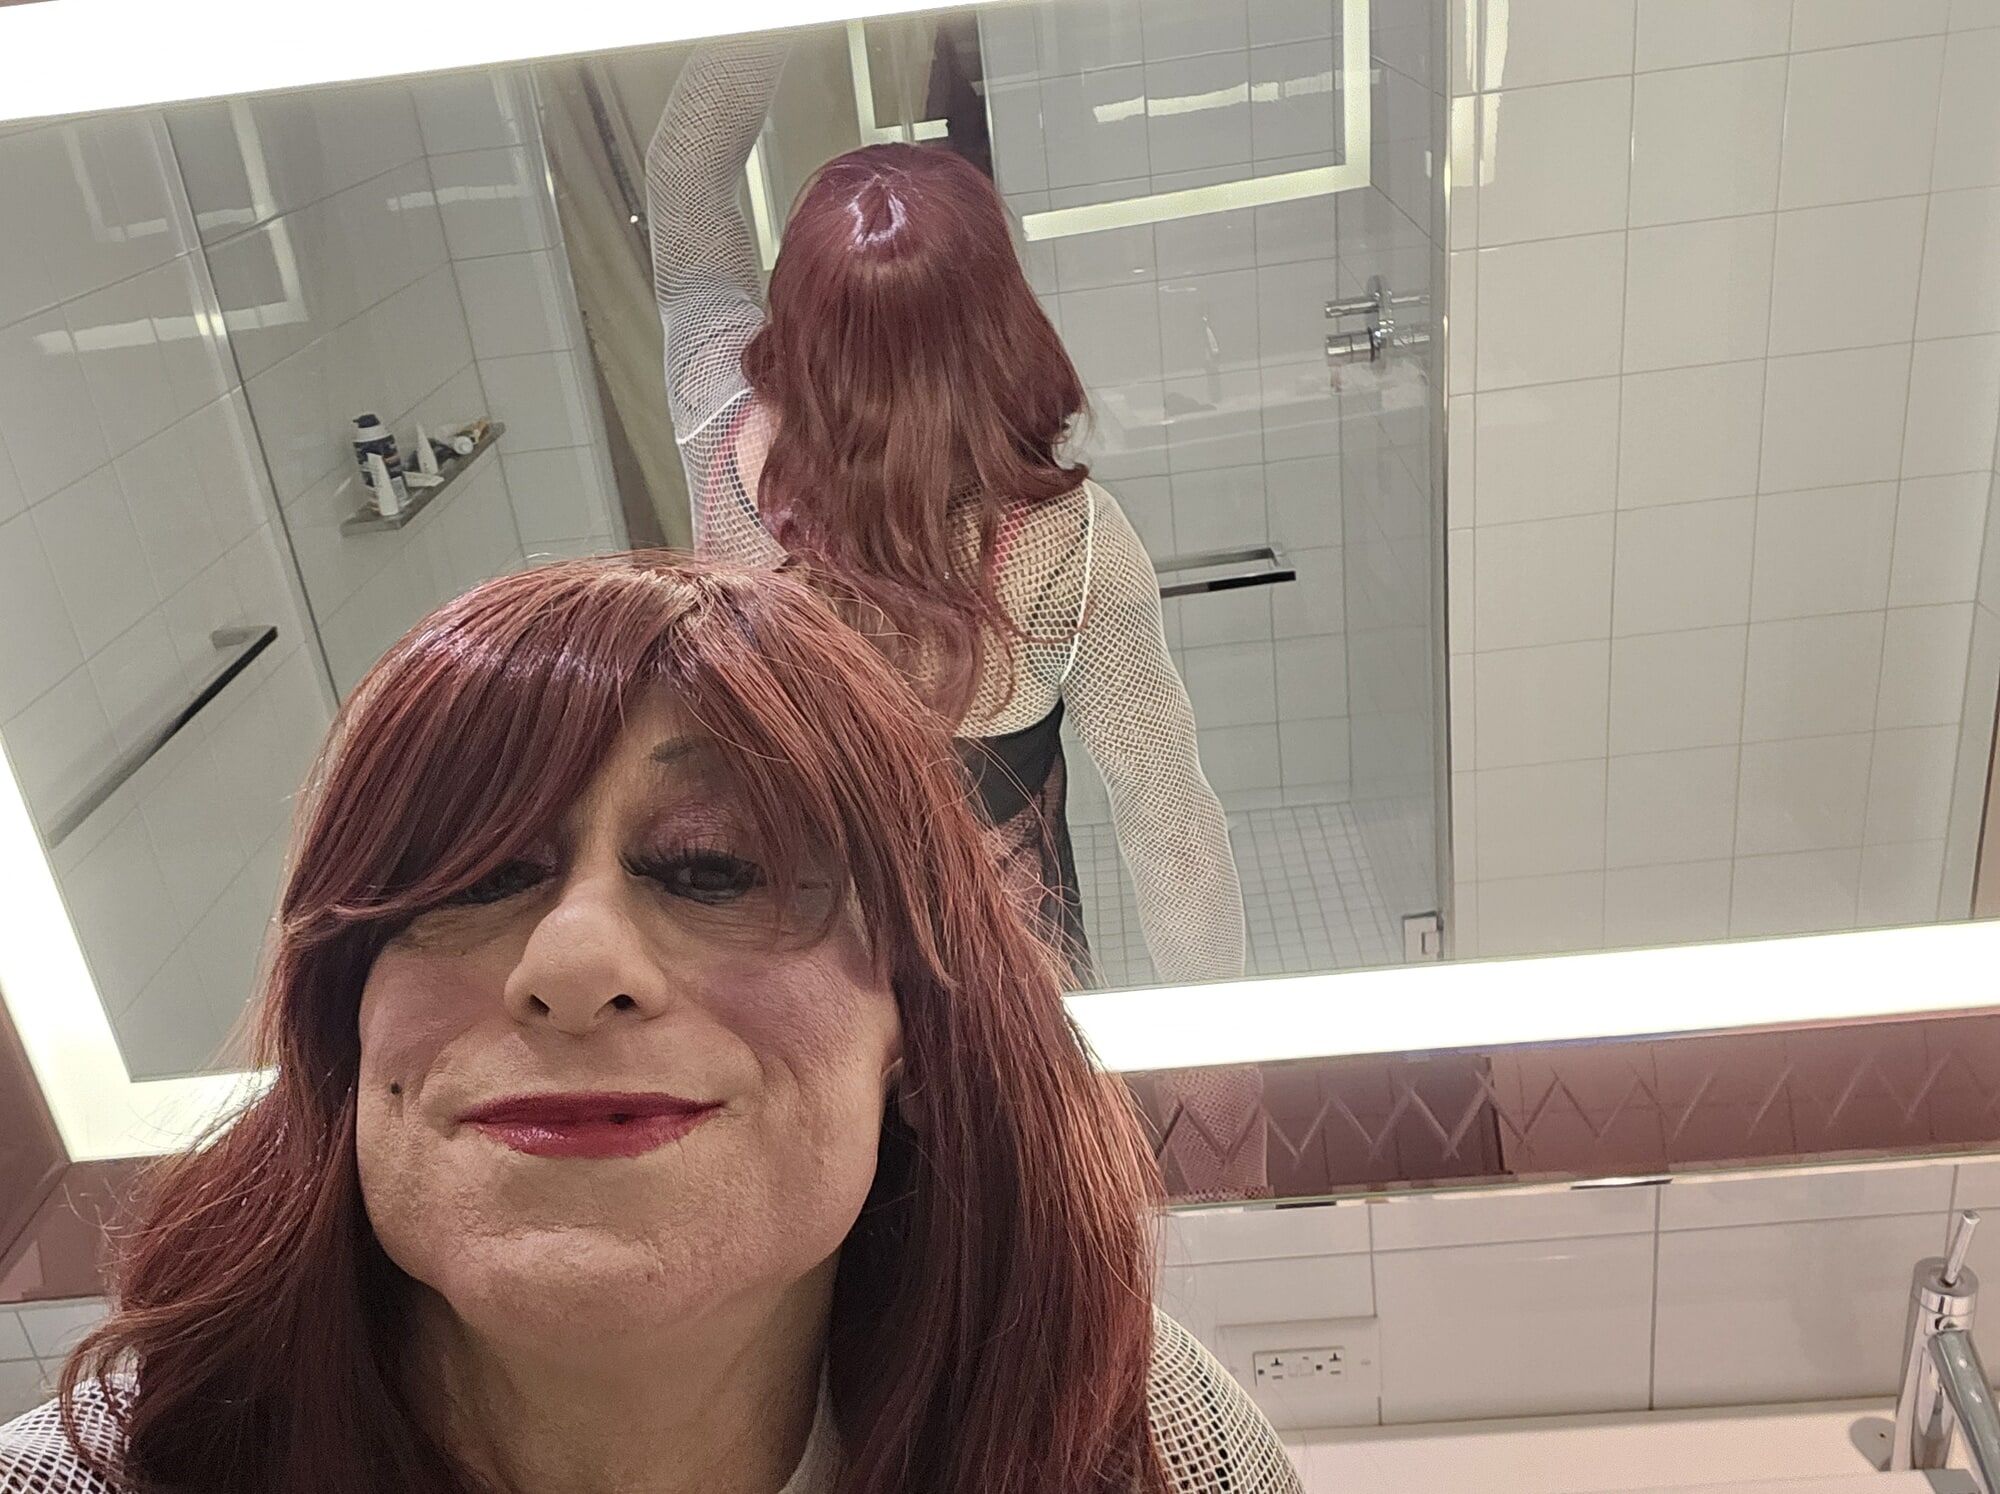 Being all pretty sissy crossdresser with a new look #3